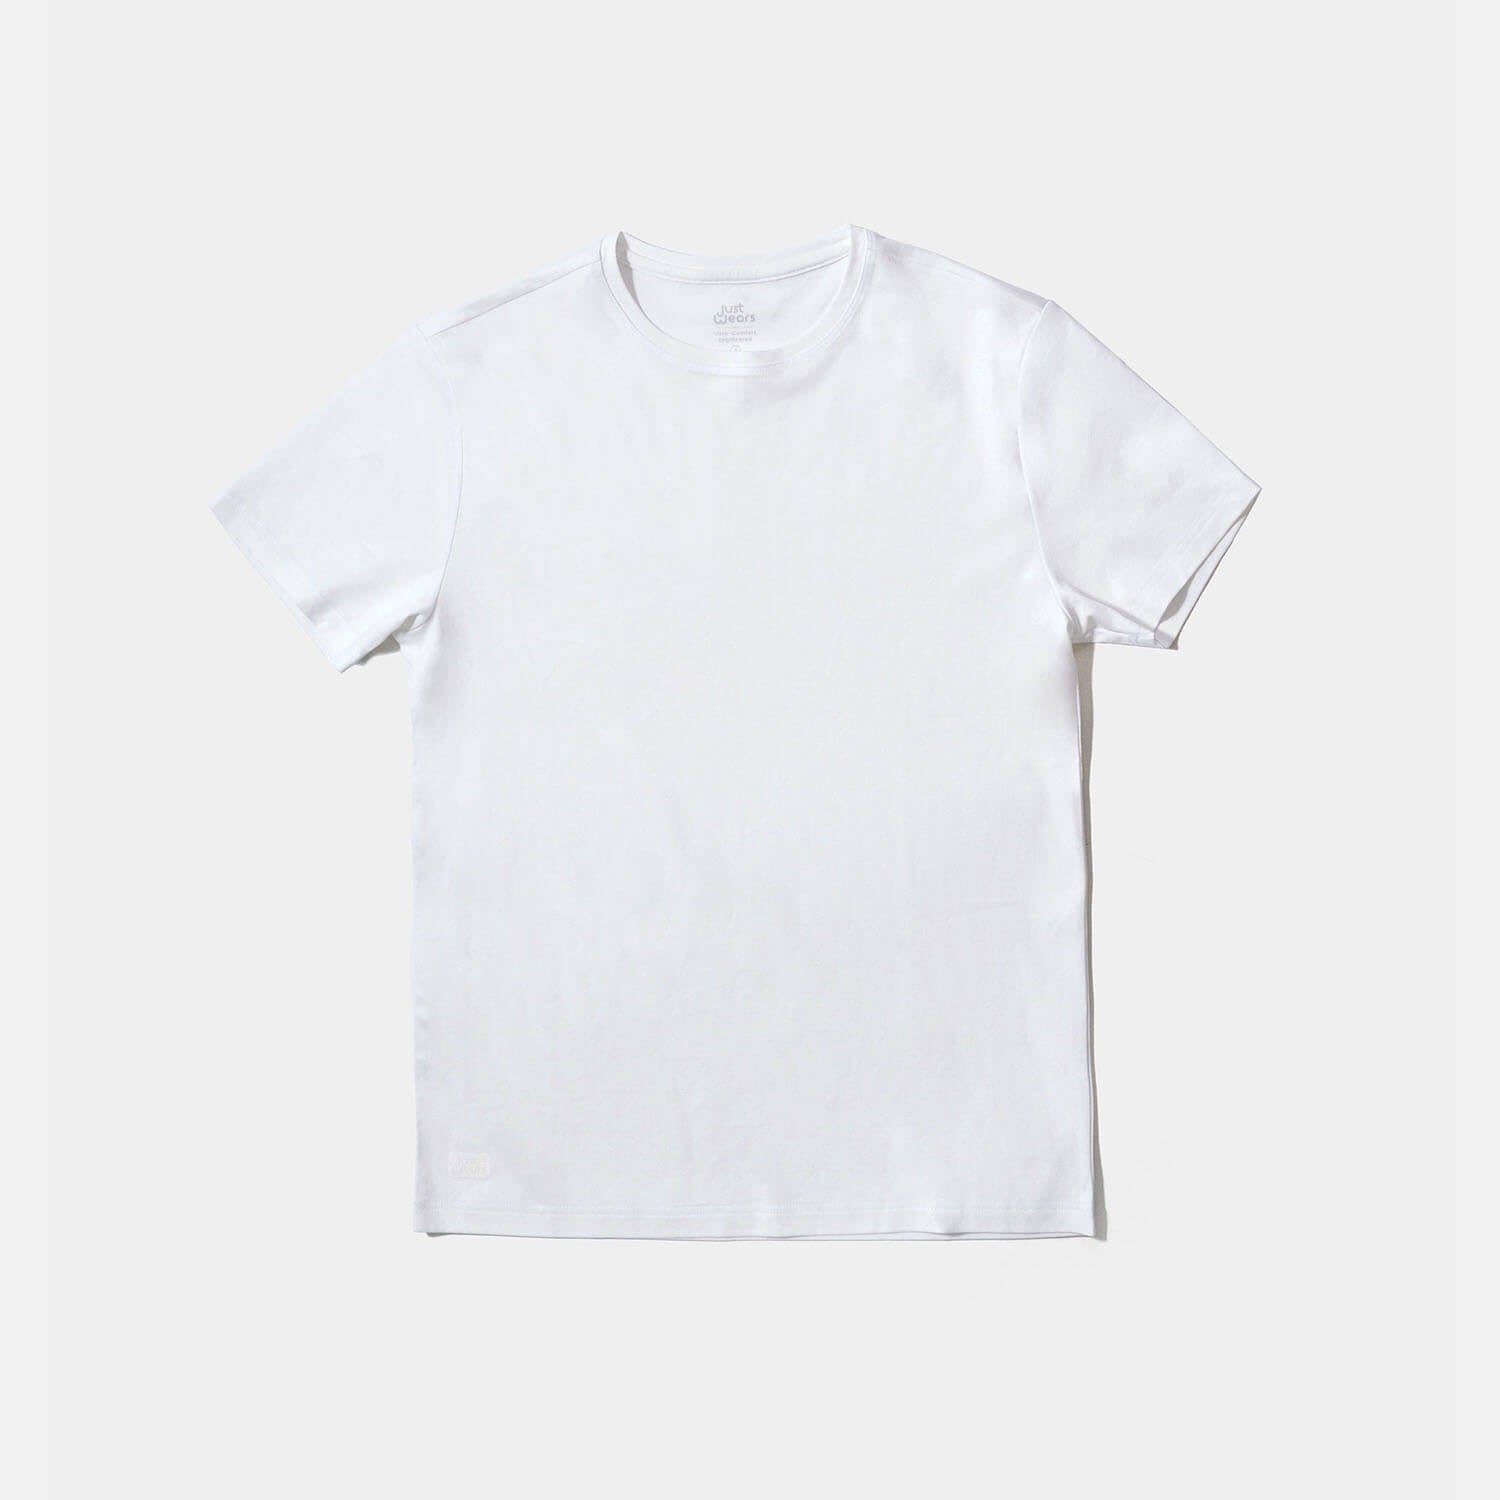 The Super Cool Tee - (color - White)